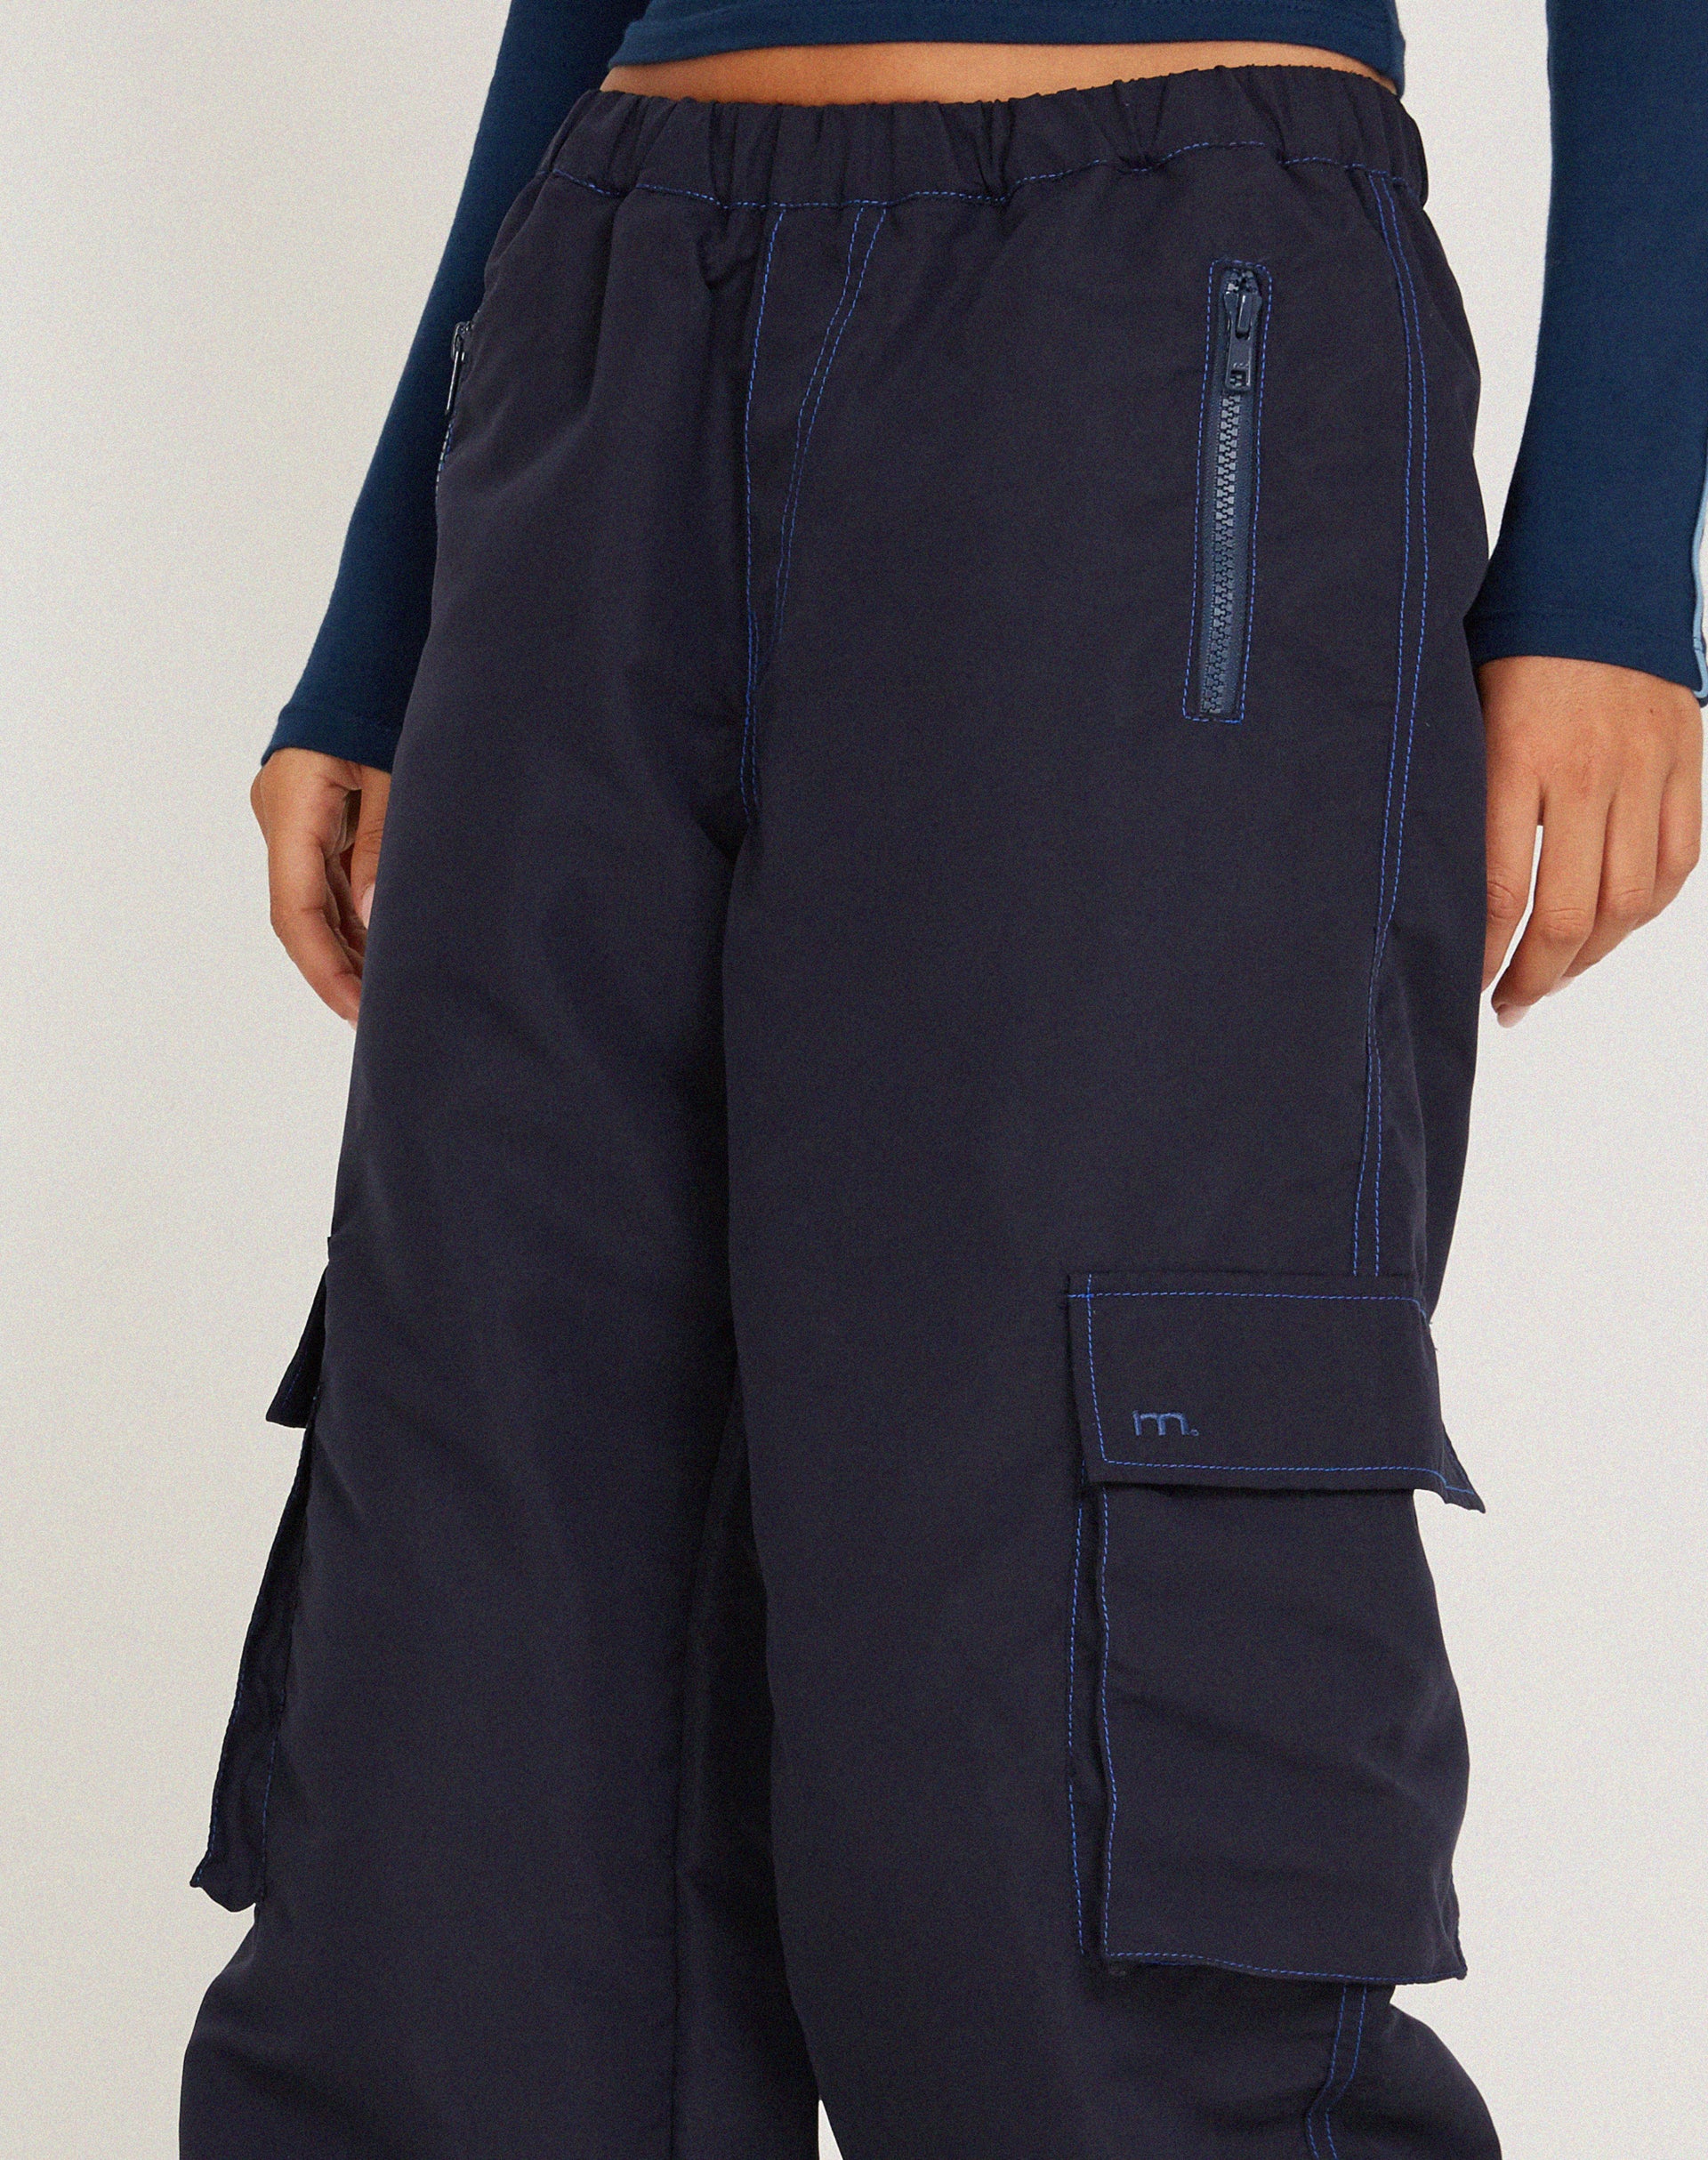 image of Oriells Cargo Trouser in Navy Top Stitch